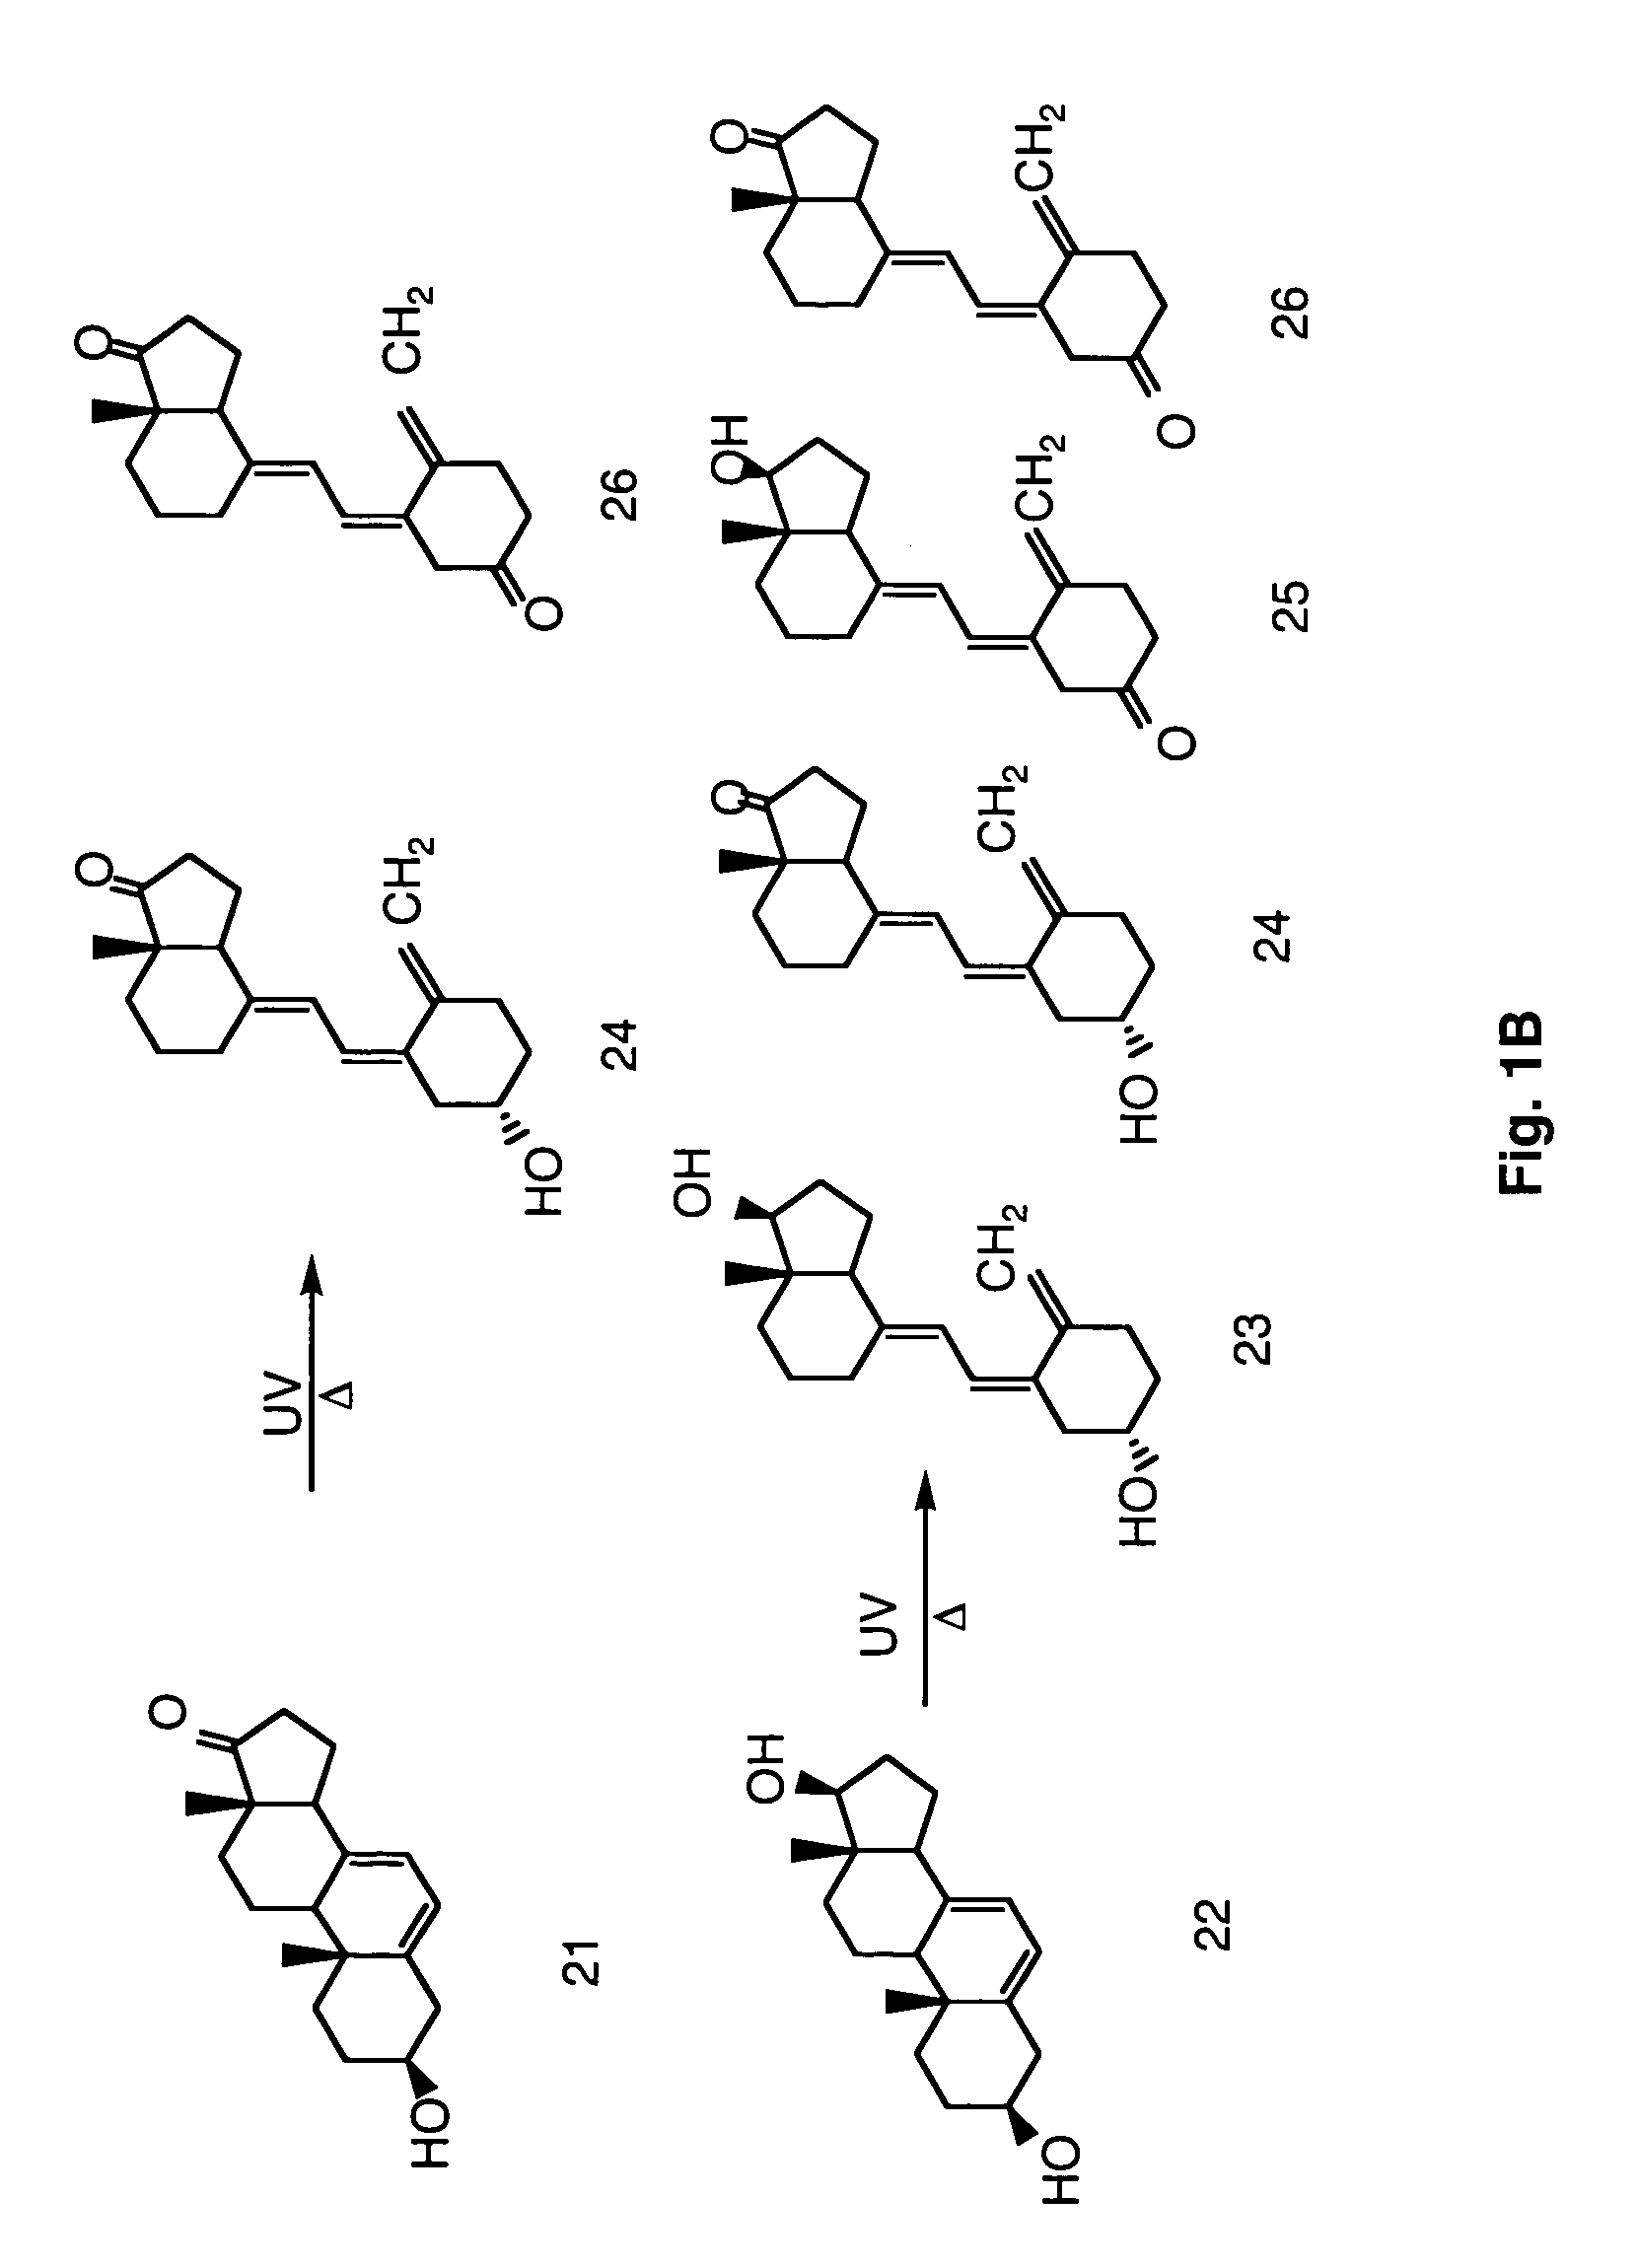 Enzymatic method to produce 7-dehydropregnenolone, vitamin D3-like compounds and derivatives thereof